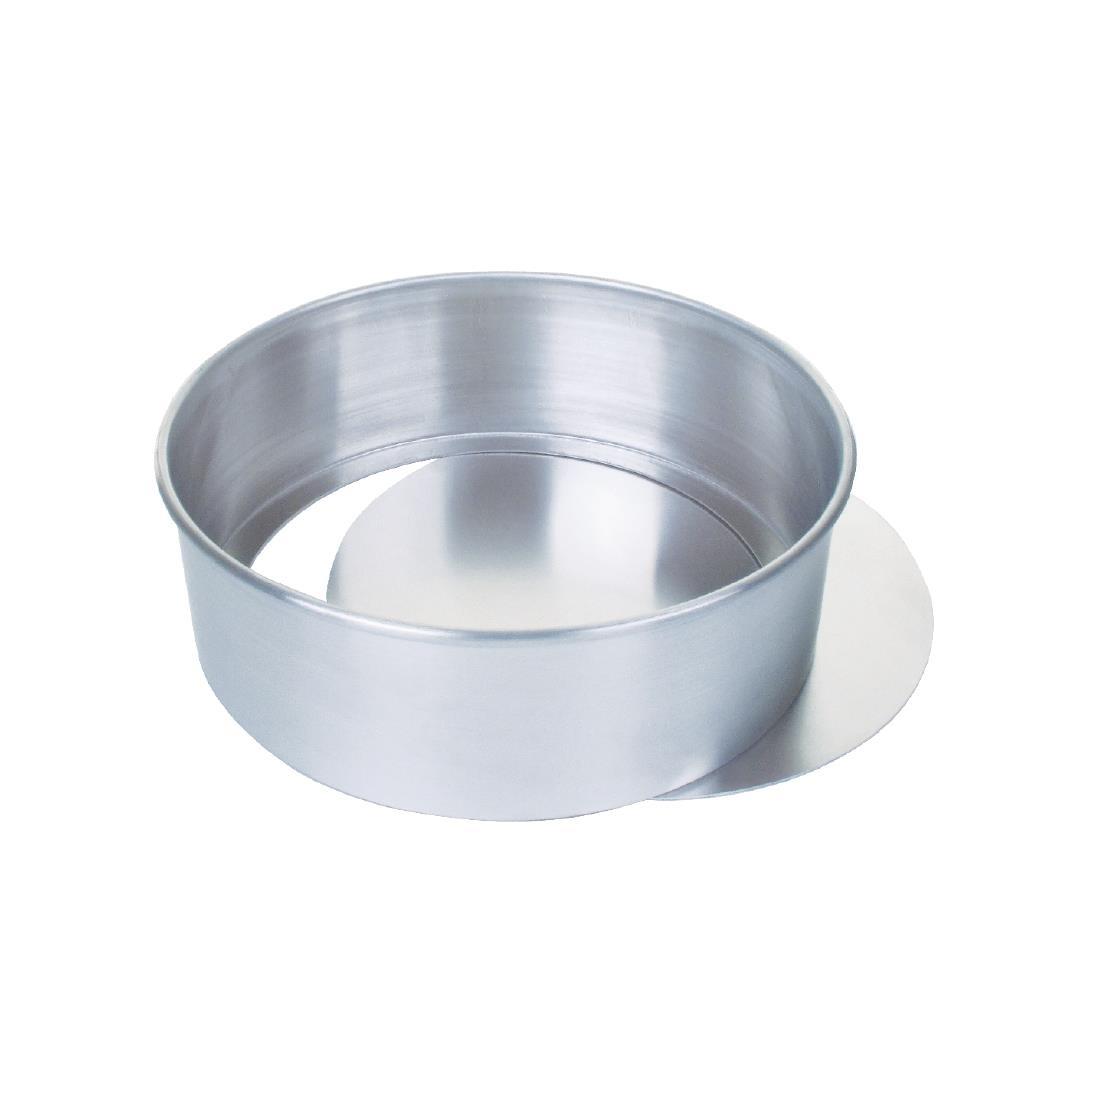 Aluminium Cake Tin With Removable Base 260mm - CE526  - 1